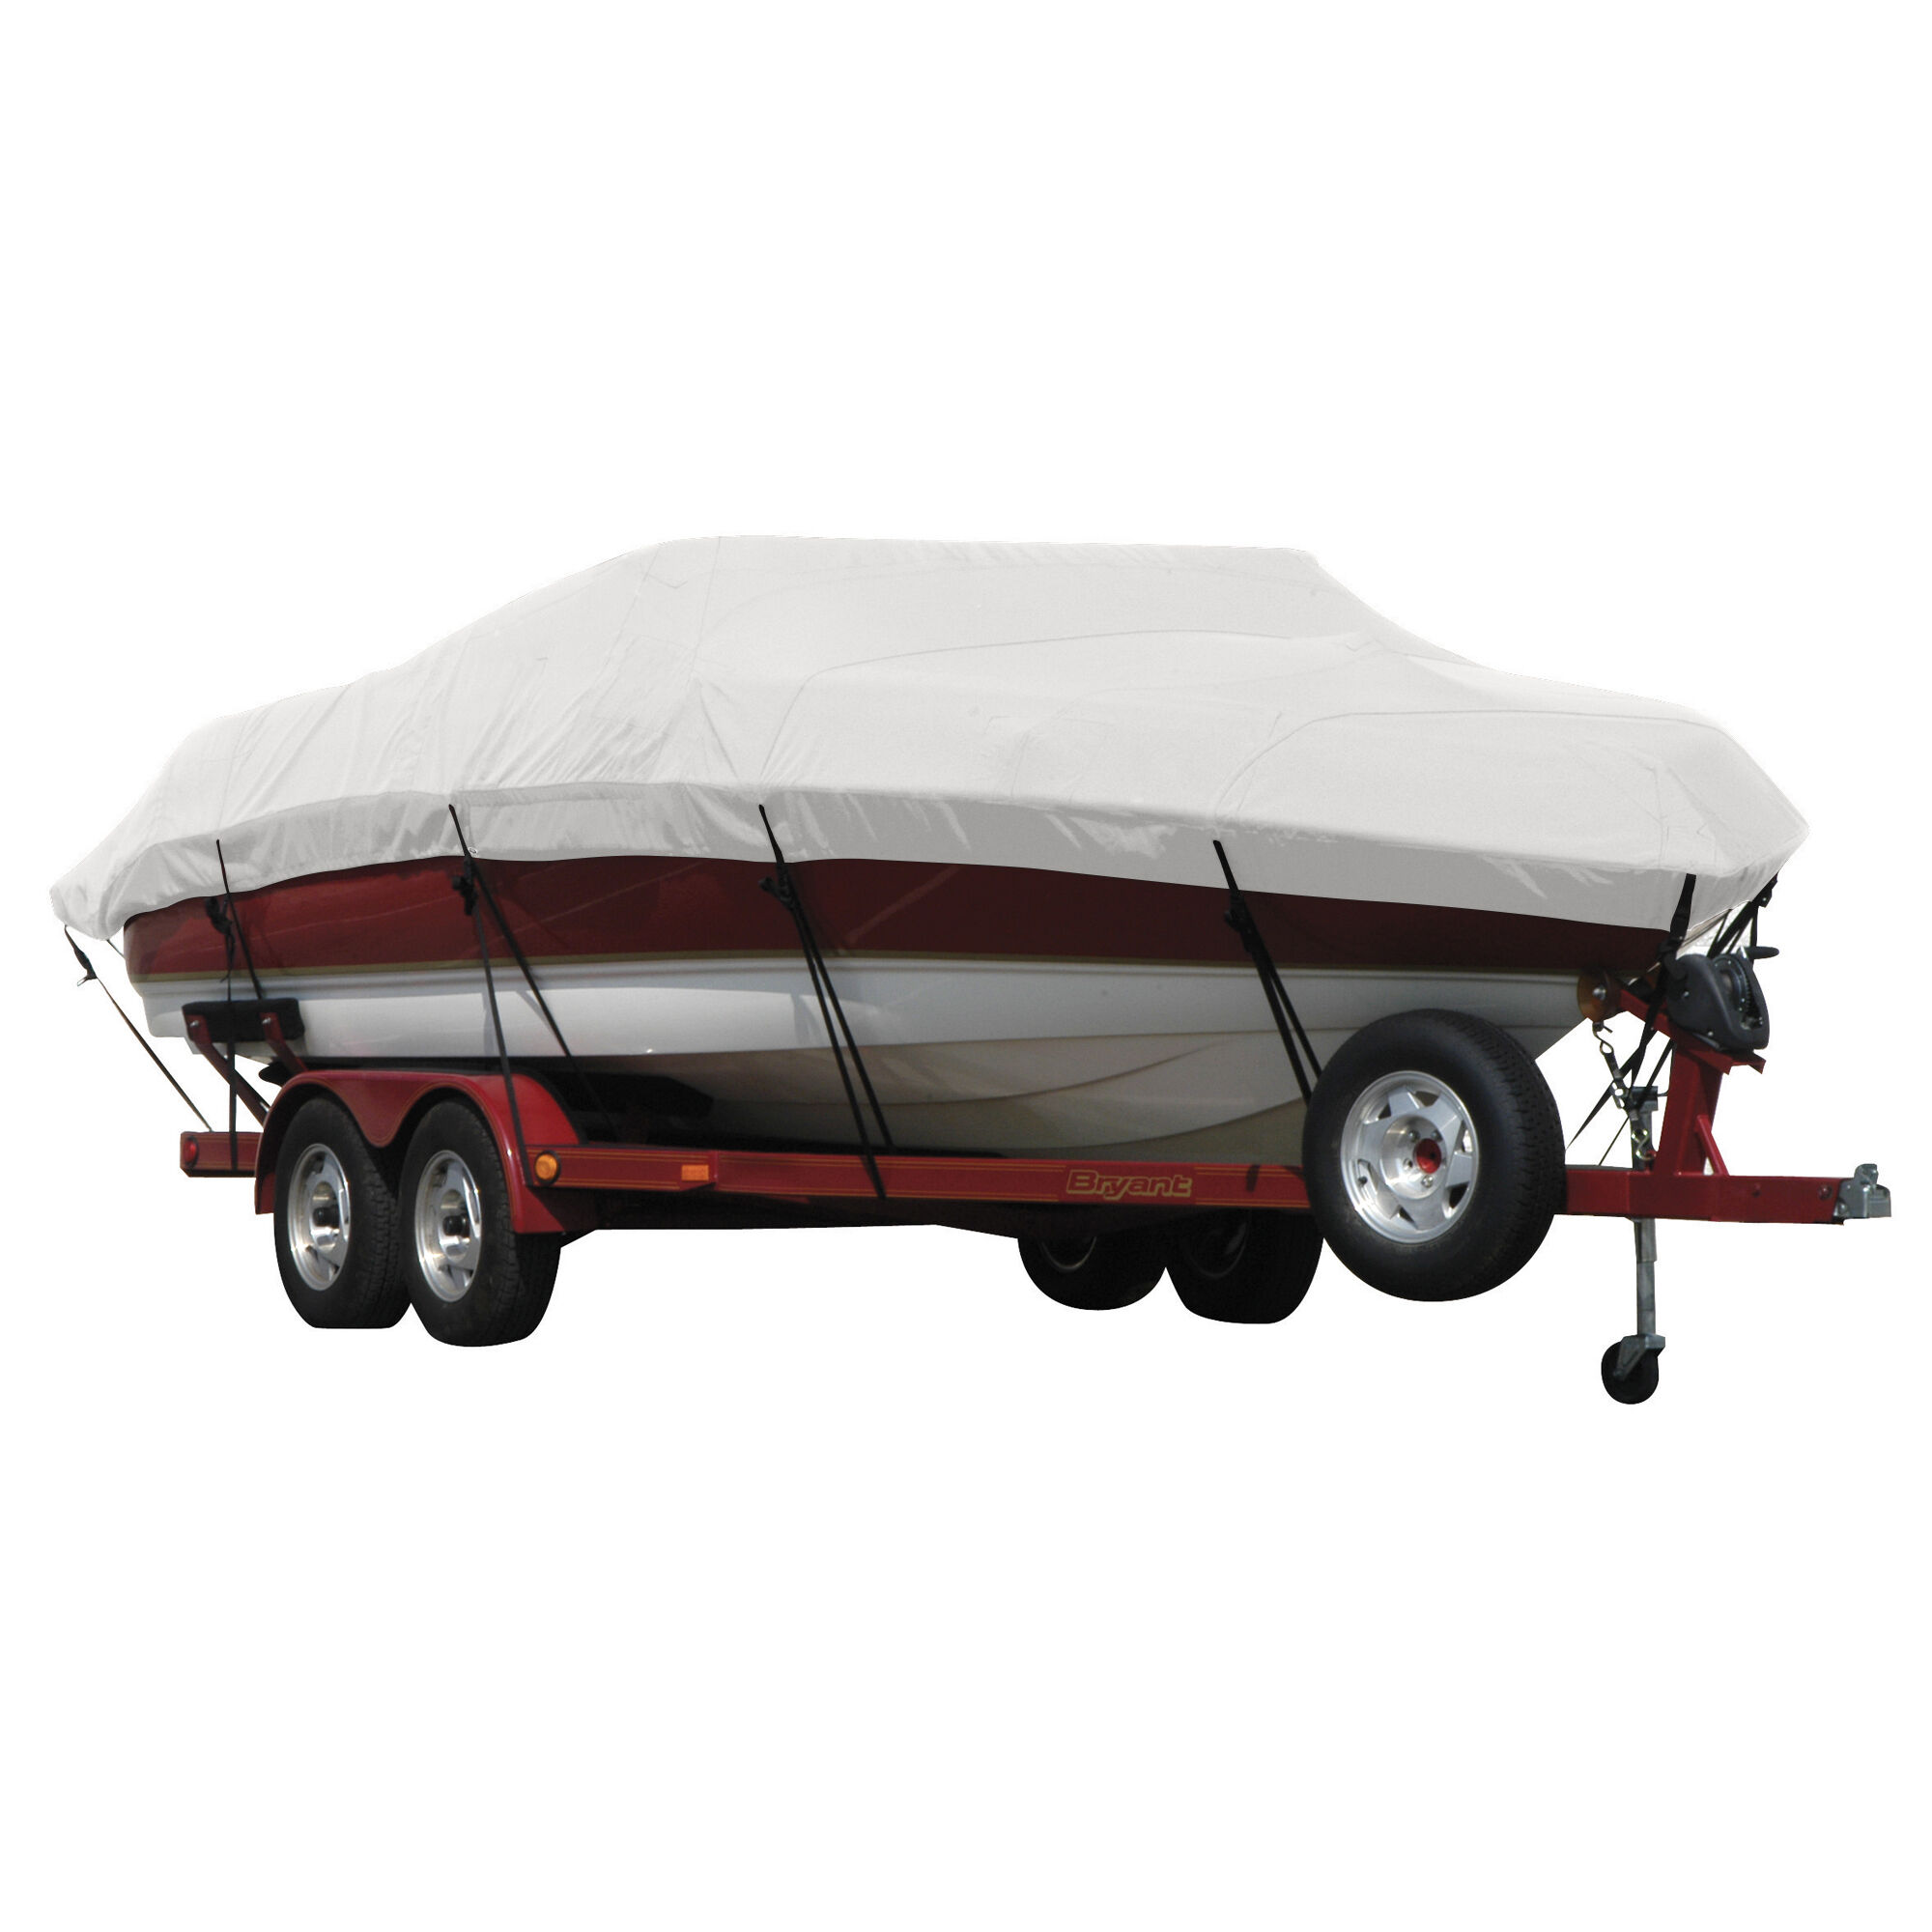 Covermate Exact Fit Sunbrella Boat Cover for Tige 2000 Slm Comp 2000 Slm Comp Does Not Cover Swim PLATFORMm. Natural in Natural Tan